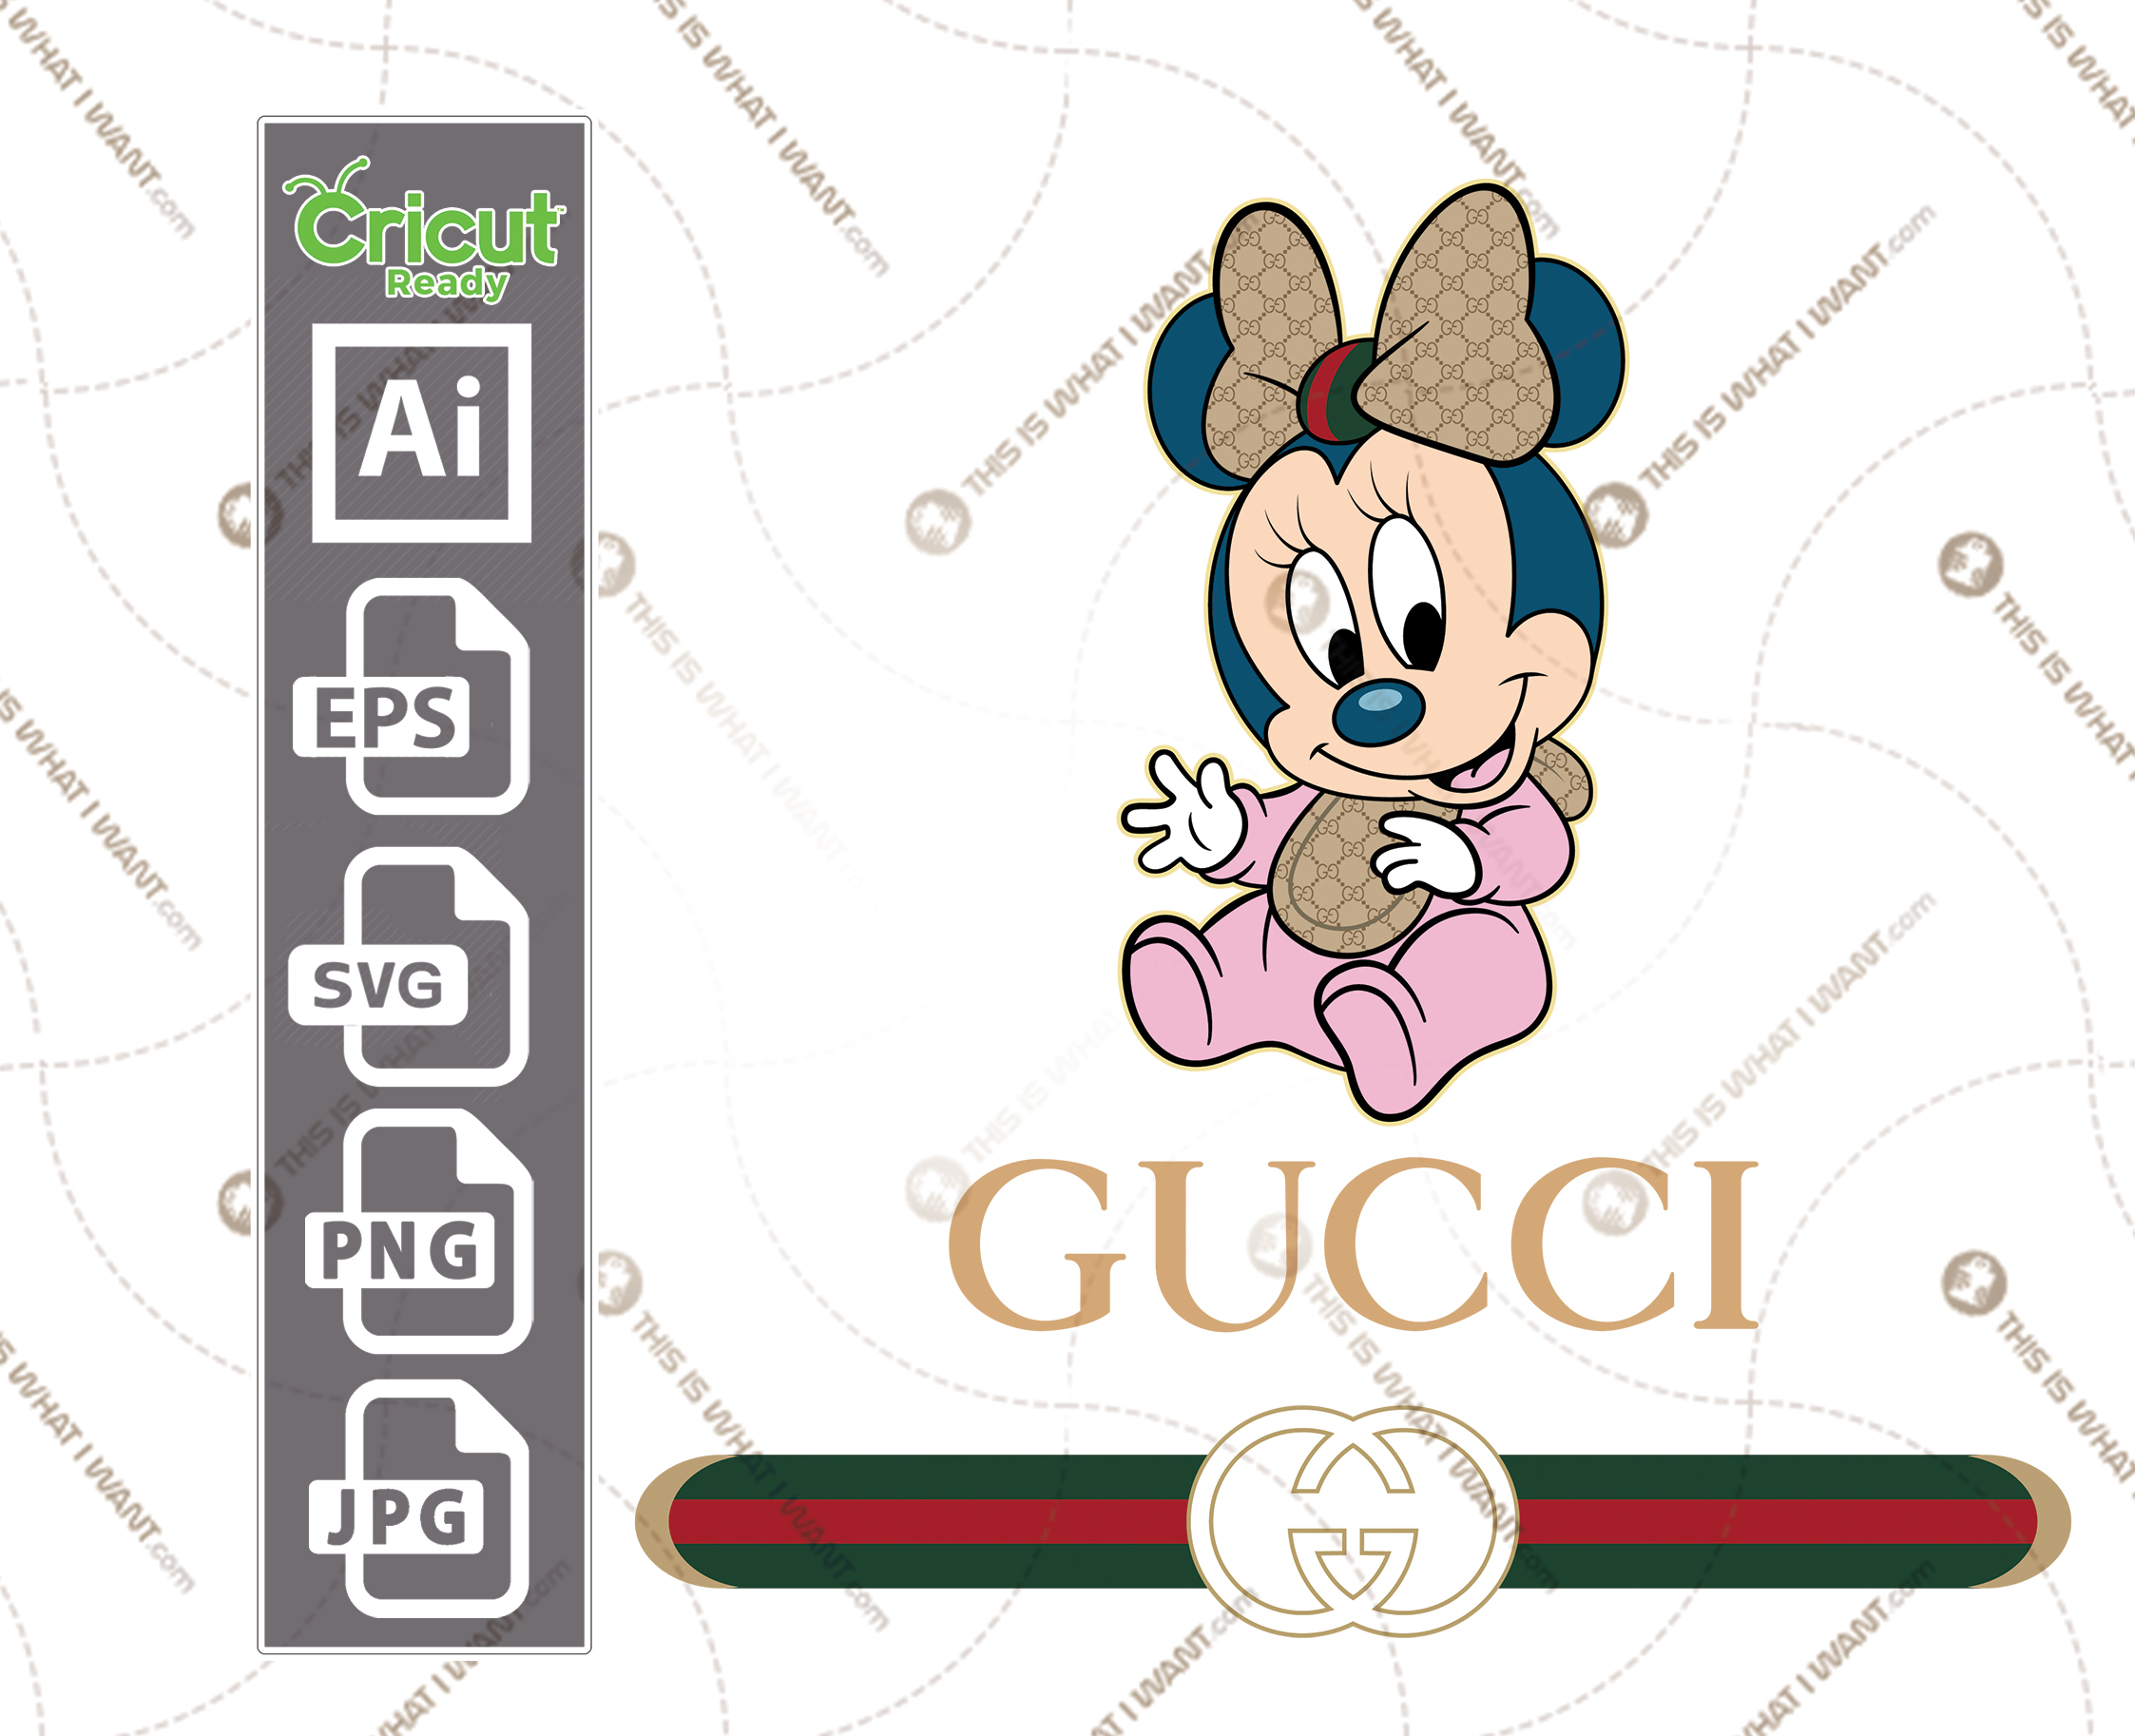 Download Gucci Baby Minnie Mouse Inspired Vector Art Design Hi Quality Digital Downloadable Files Bundle Ai Svg Jpg Png Eps Cricut Ready This Is What I Want SVG, PNG, EPS, DXF File